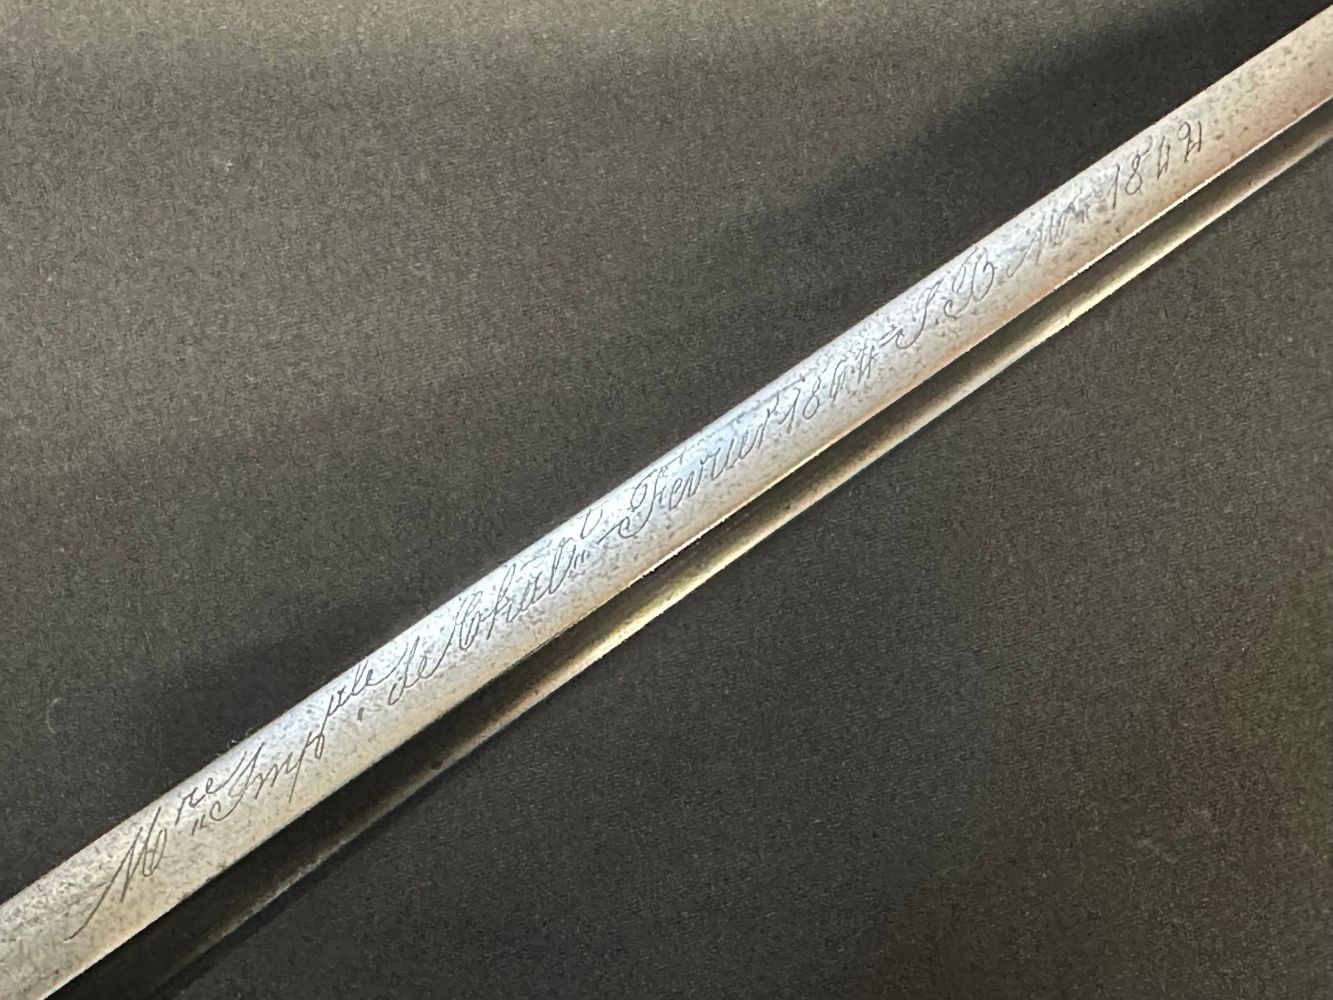 French 1842 Yataghan Pattern Bayonet with single edged fullered blade 574mm in length. Spine of - Image 11 of 14